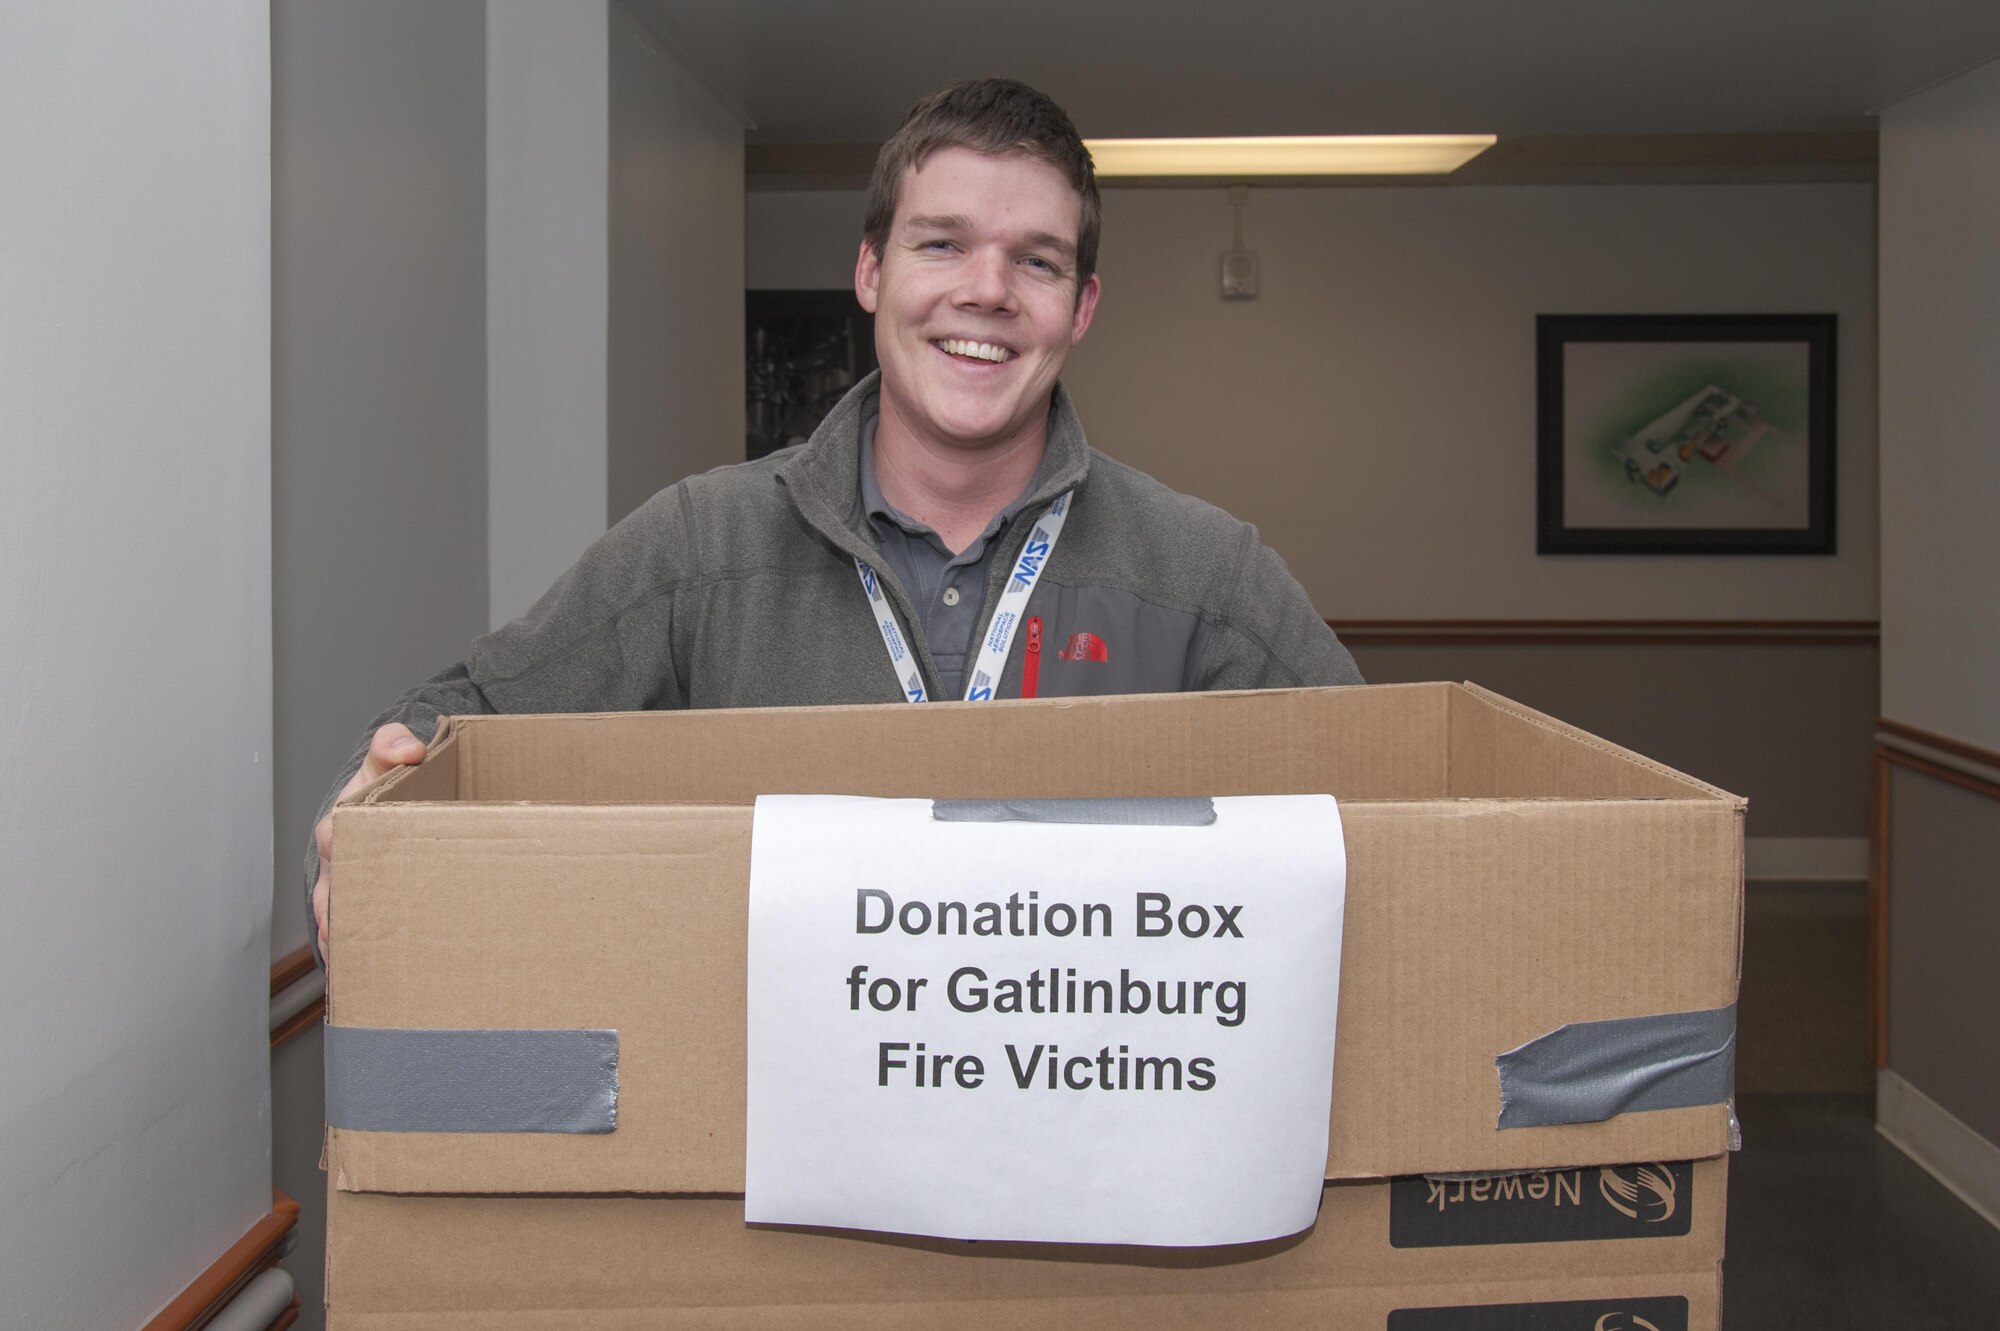 Kevin Brown, Propulsion Wind Tunnel mechanical system engineer, collects donations in the Administration and Engineering building at Arnold Engineering Development Complex Dec. 8 for Sevier County officials, in efforts to help the Gatlinburg fire victims. Donations requested include items such as baby supplies, personal hygiene, food, clothes, medicine and other miscellaneous items. Donations were delivered to the Sevier County University of Tennessee Extension Office Dec. 10. (U.S. Air Force photo/Jacqueline Cowan)